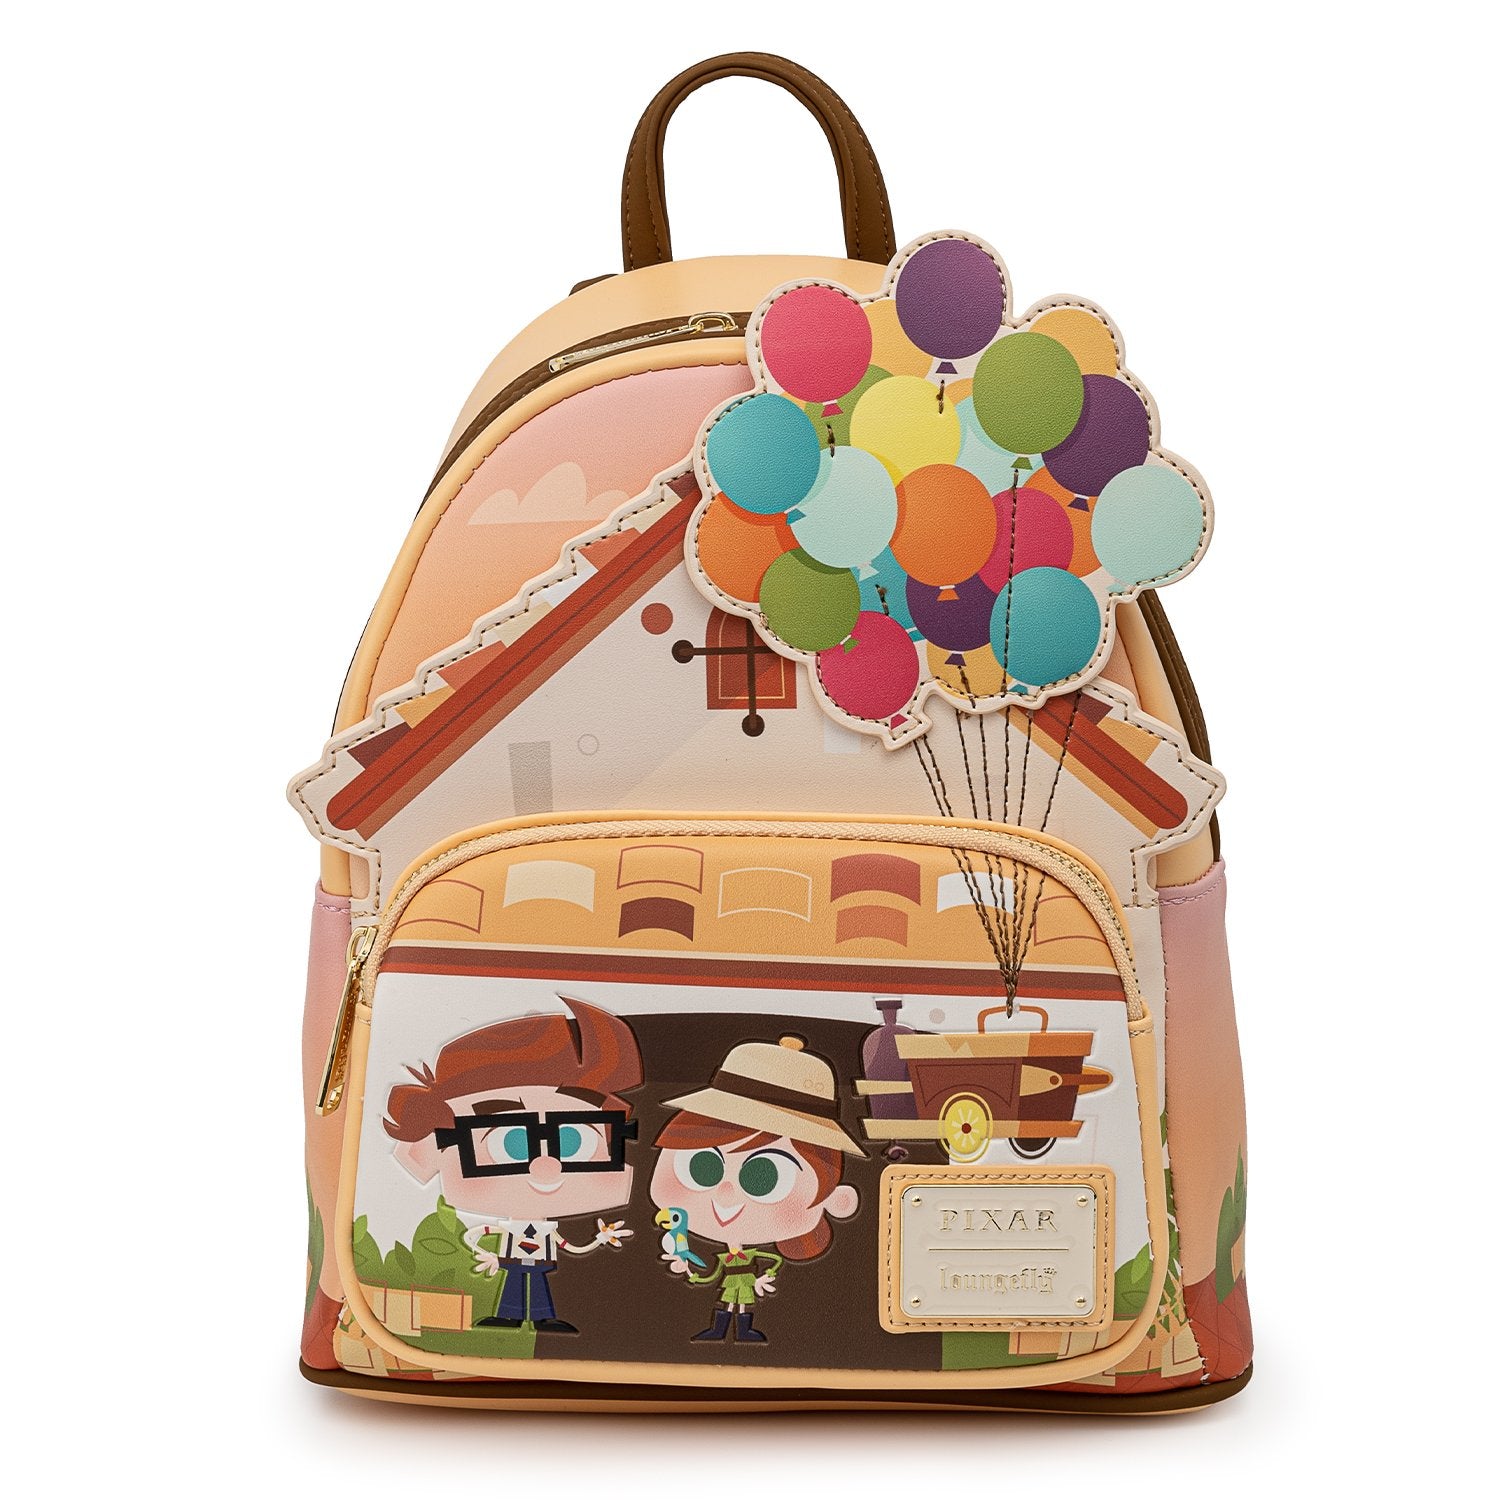 loungefly backpack disney